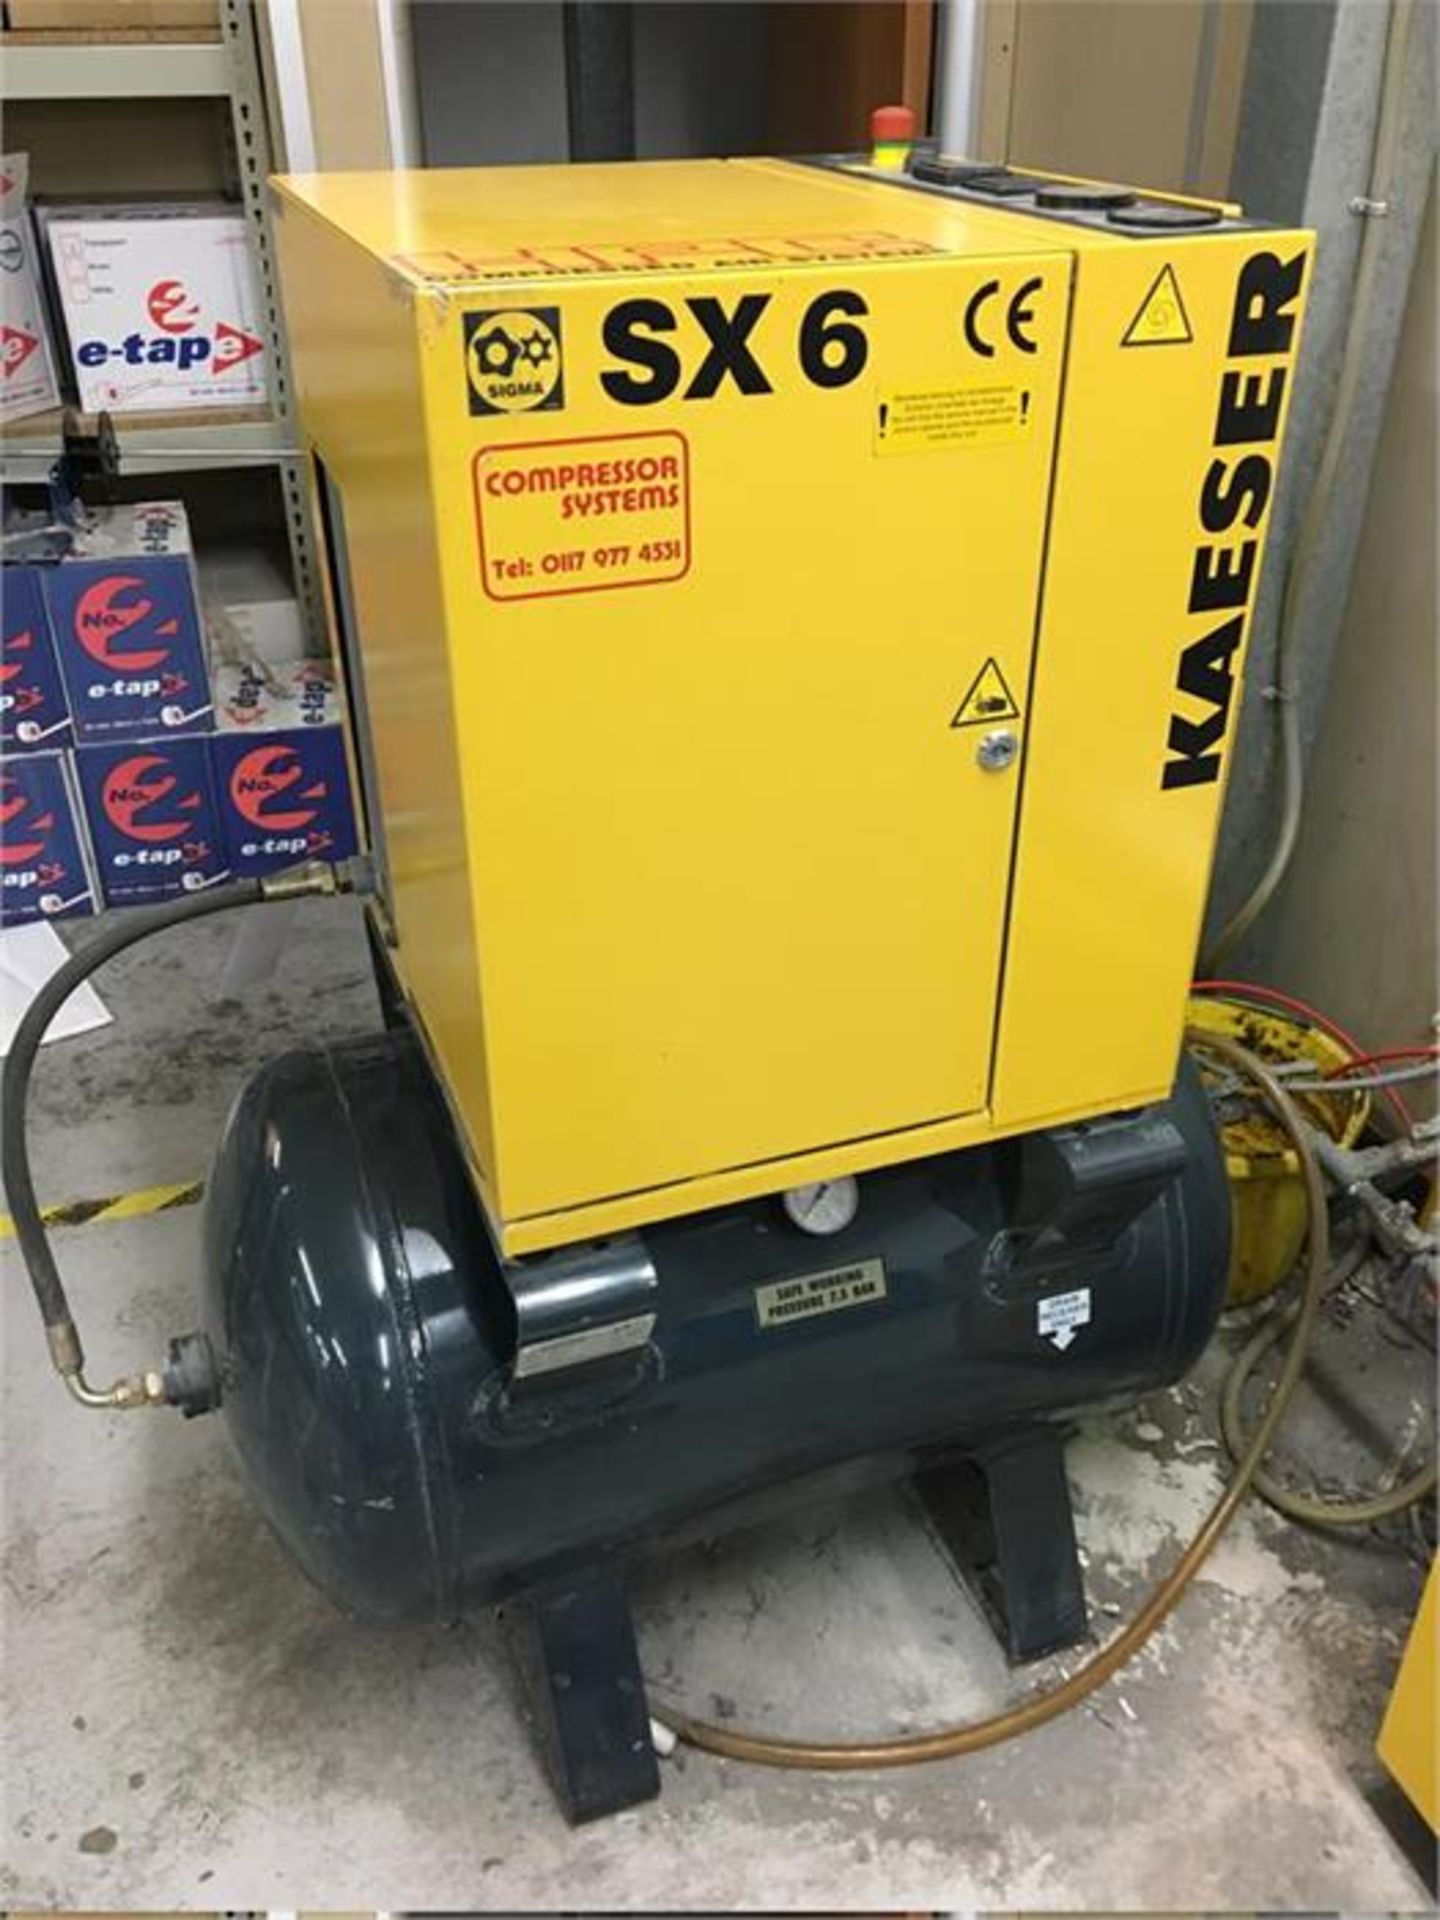 Kaeser SX6 rotary screw air compressor complete with TAH6 dryer, Serial Number: 1376, Year: 2006,